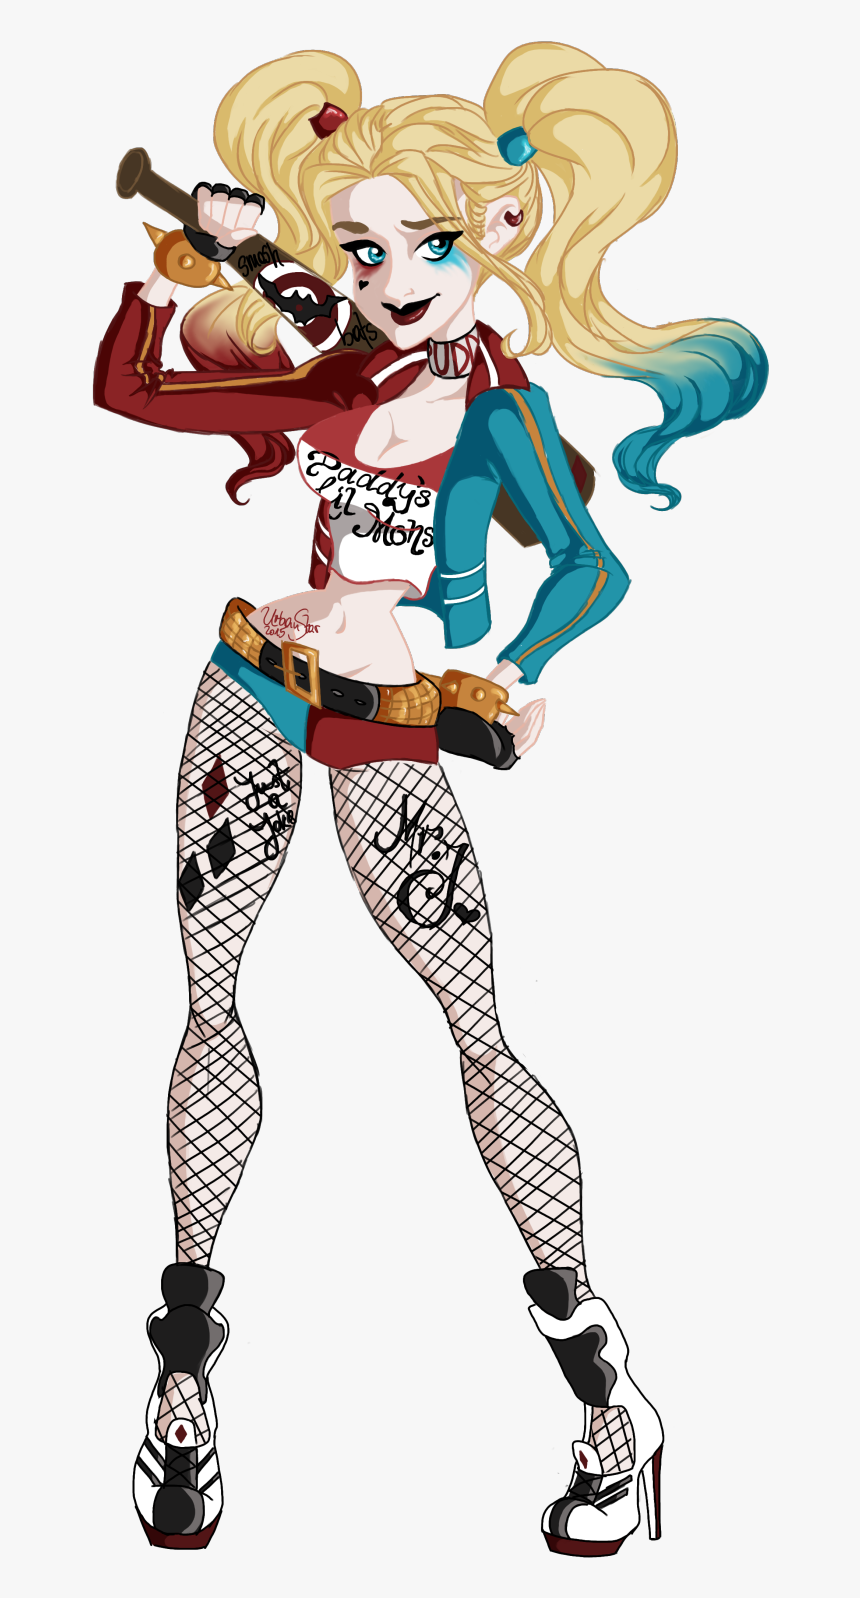 Harley Quinn From Dc’s Suicide Squad - Harley Quinn Cartoon Suicide Squad, HD Png Download, Free Download